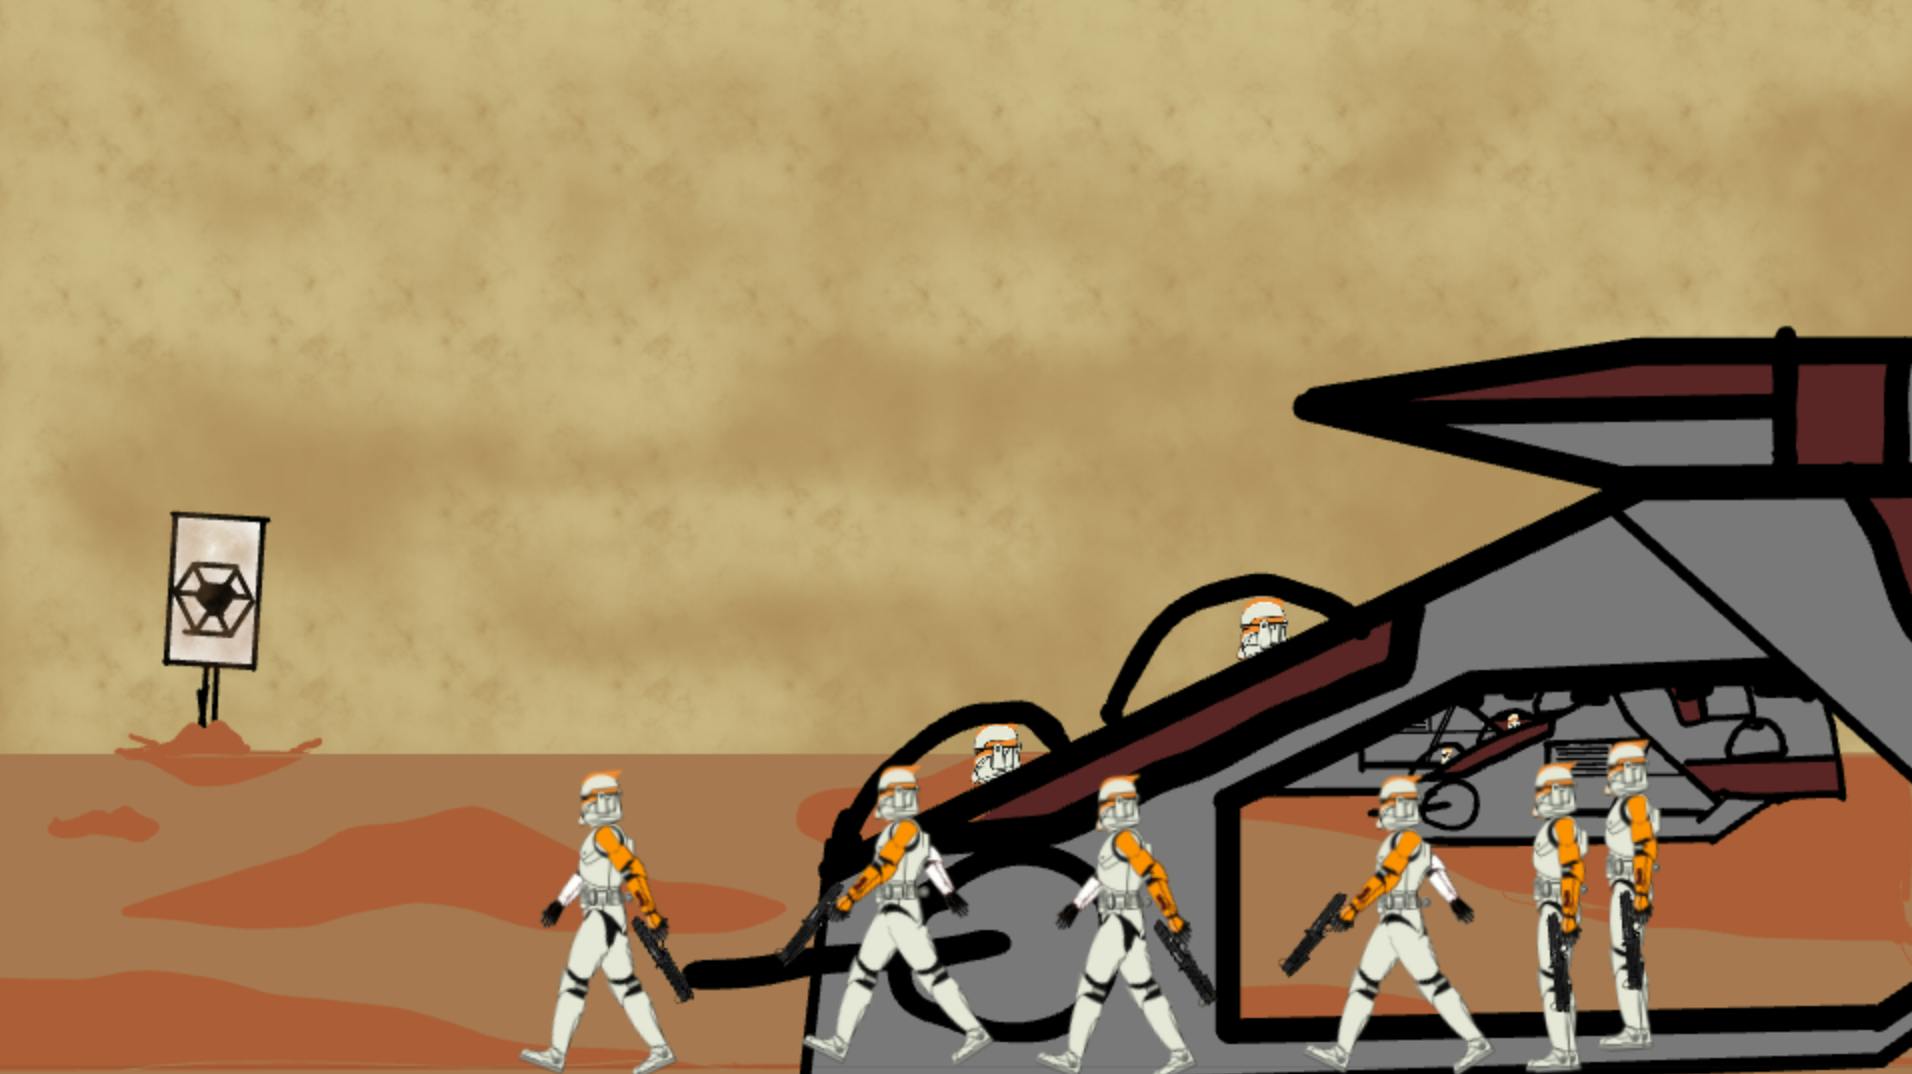 Image of an alien planet and 8 Stormtroopers are marching out of a space ship. There's a sign on the planet that shows the symbol of the Separatists